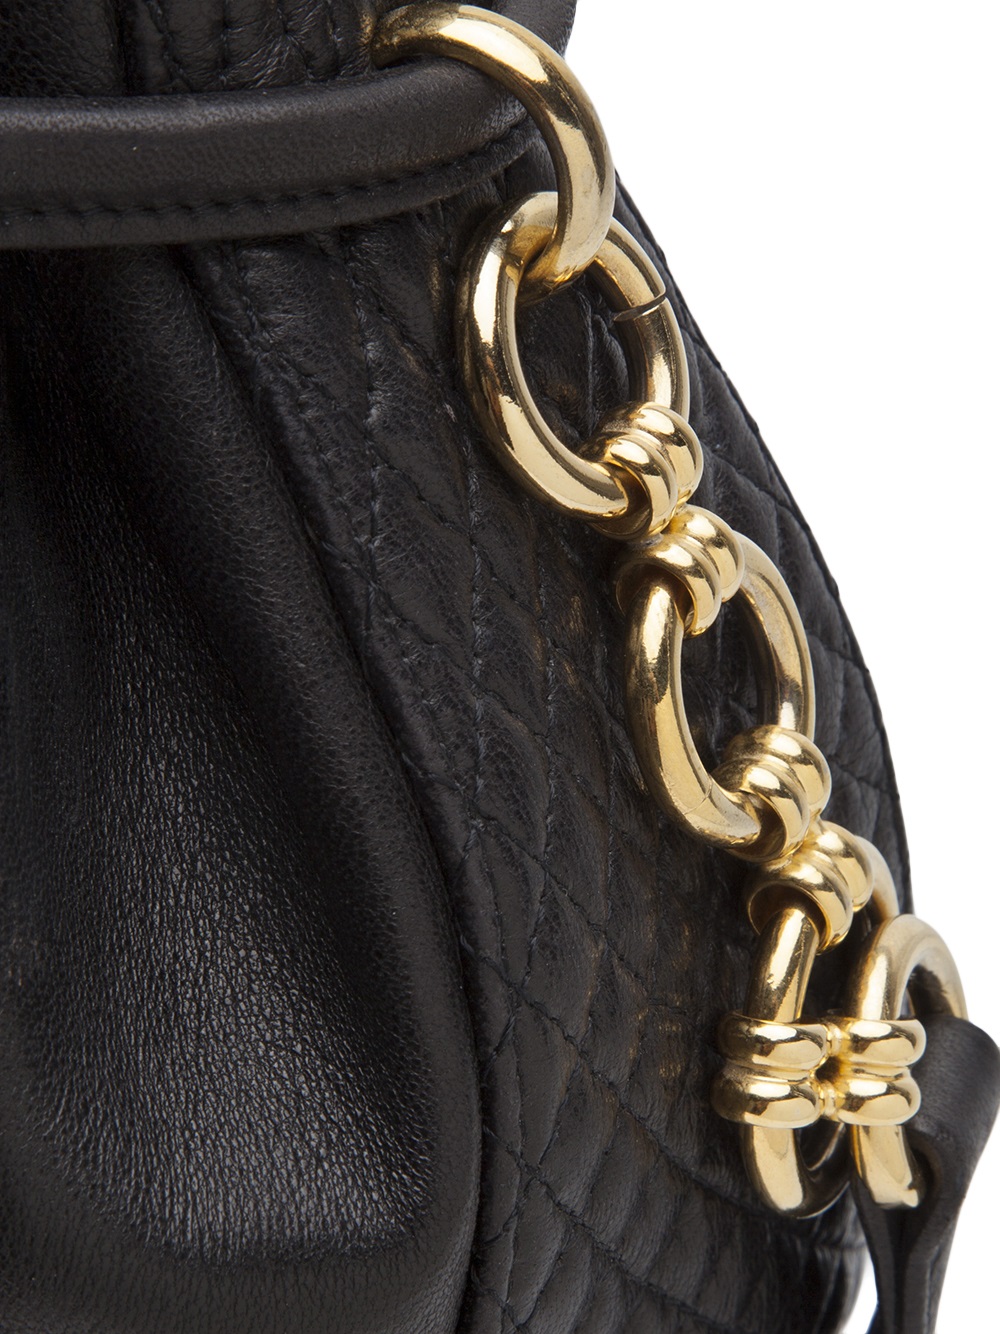 Bally Quilted Leather Drawstring Bag in Black